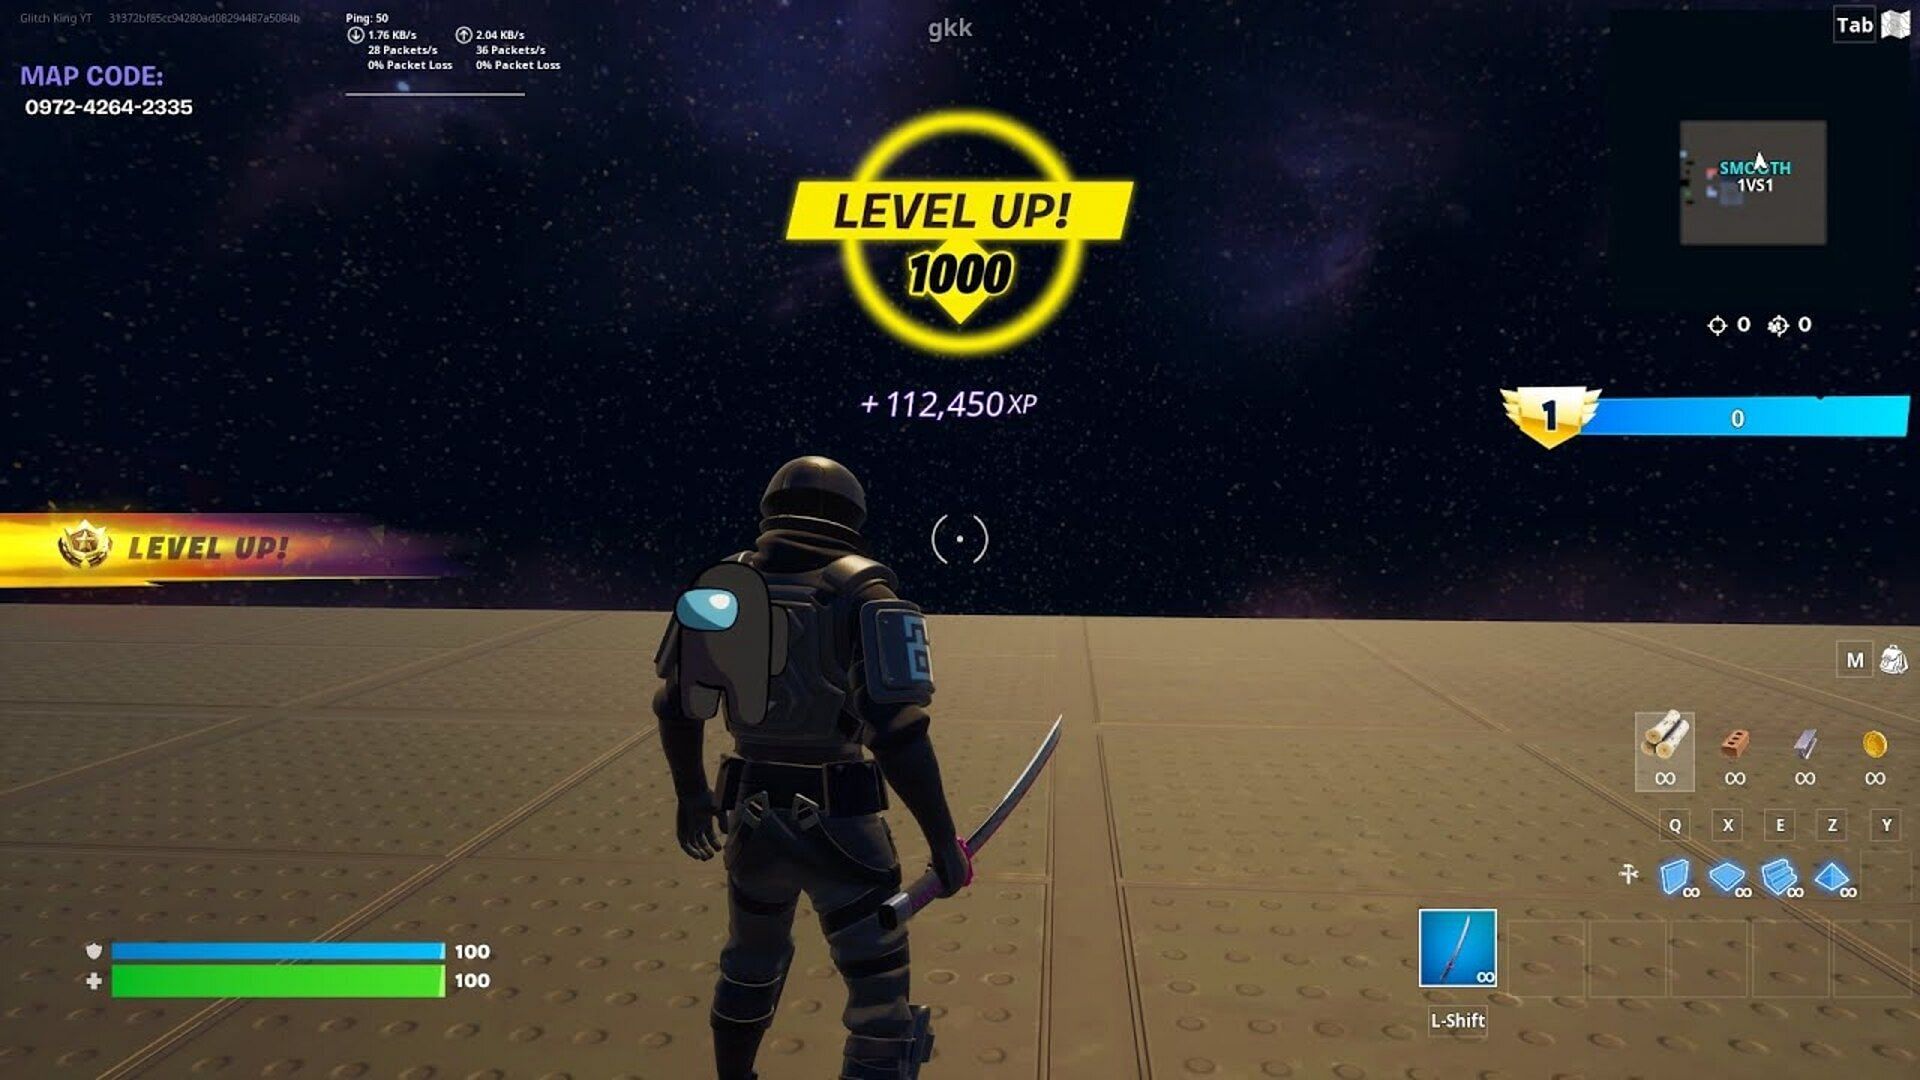 Using XP glitches in Fortnite allows players to level up quickly (Image via Epic Games)